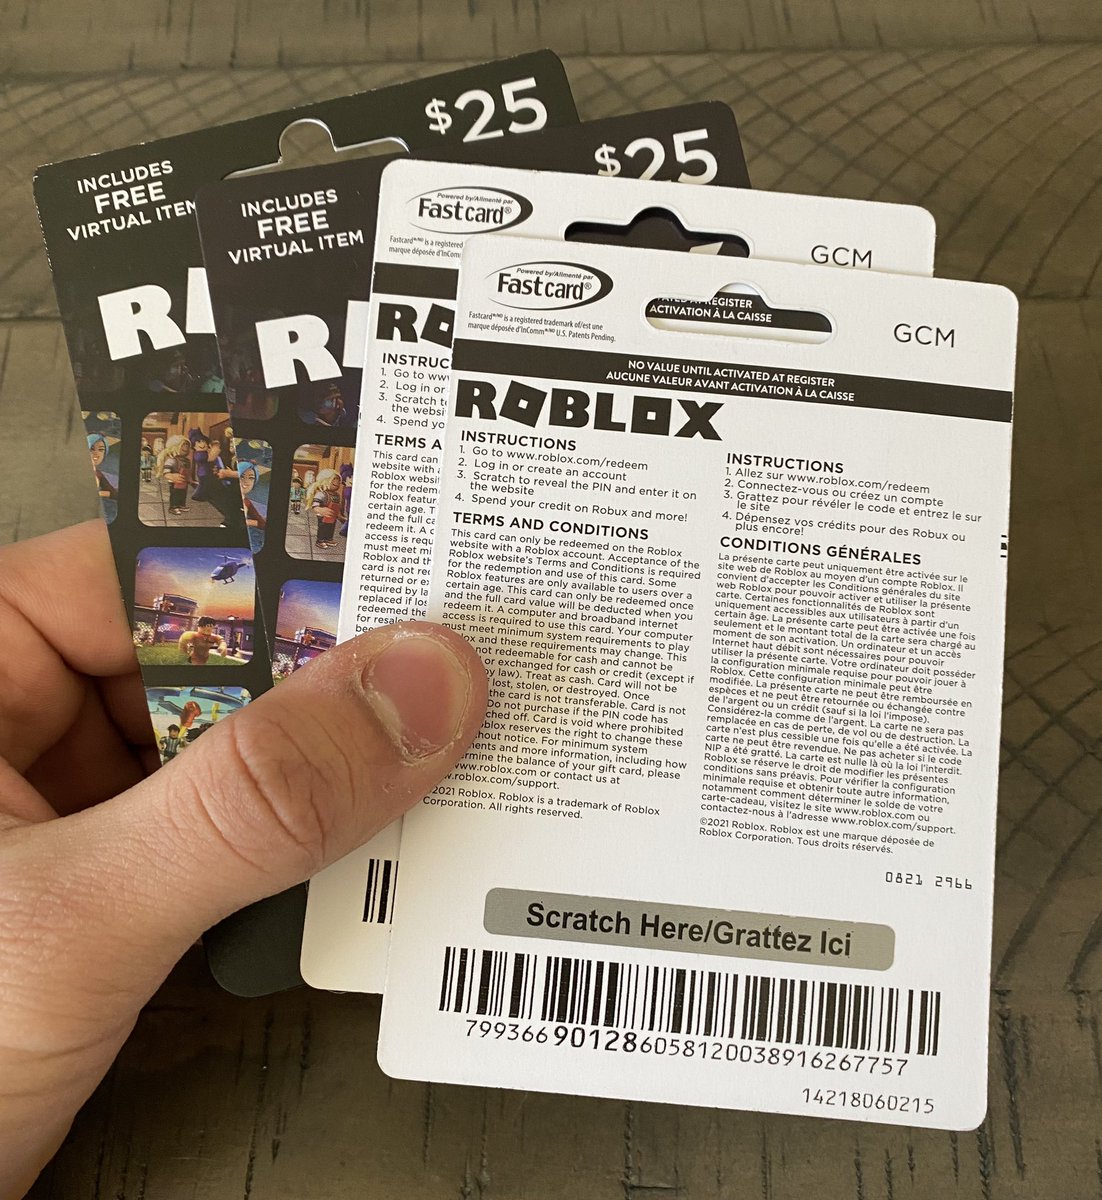 Model8197 on X: Which Robux Gift Card do you want?